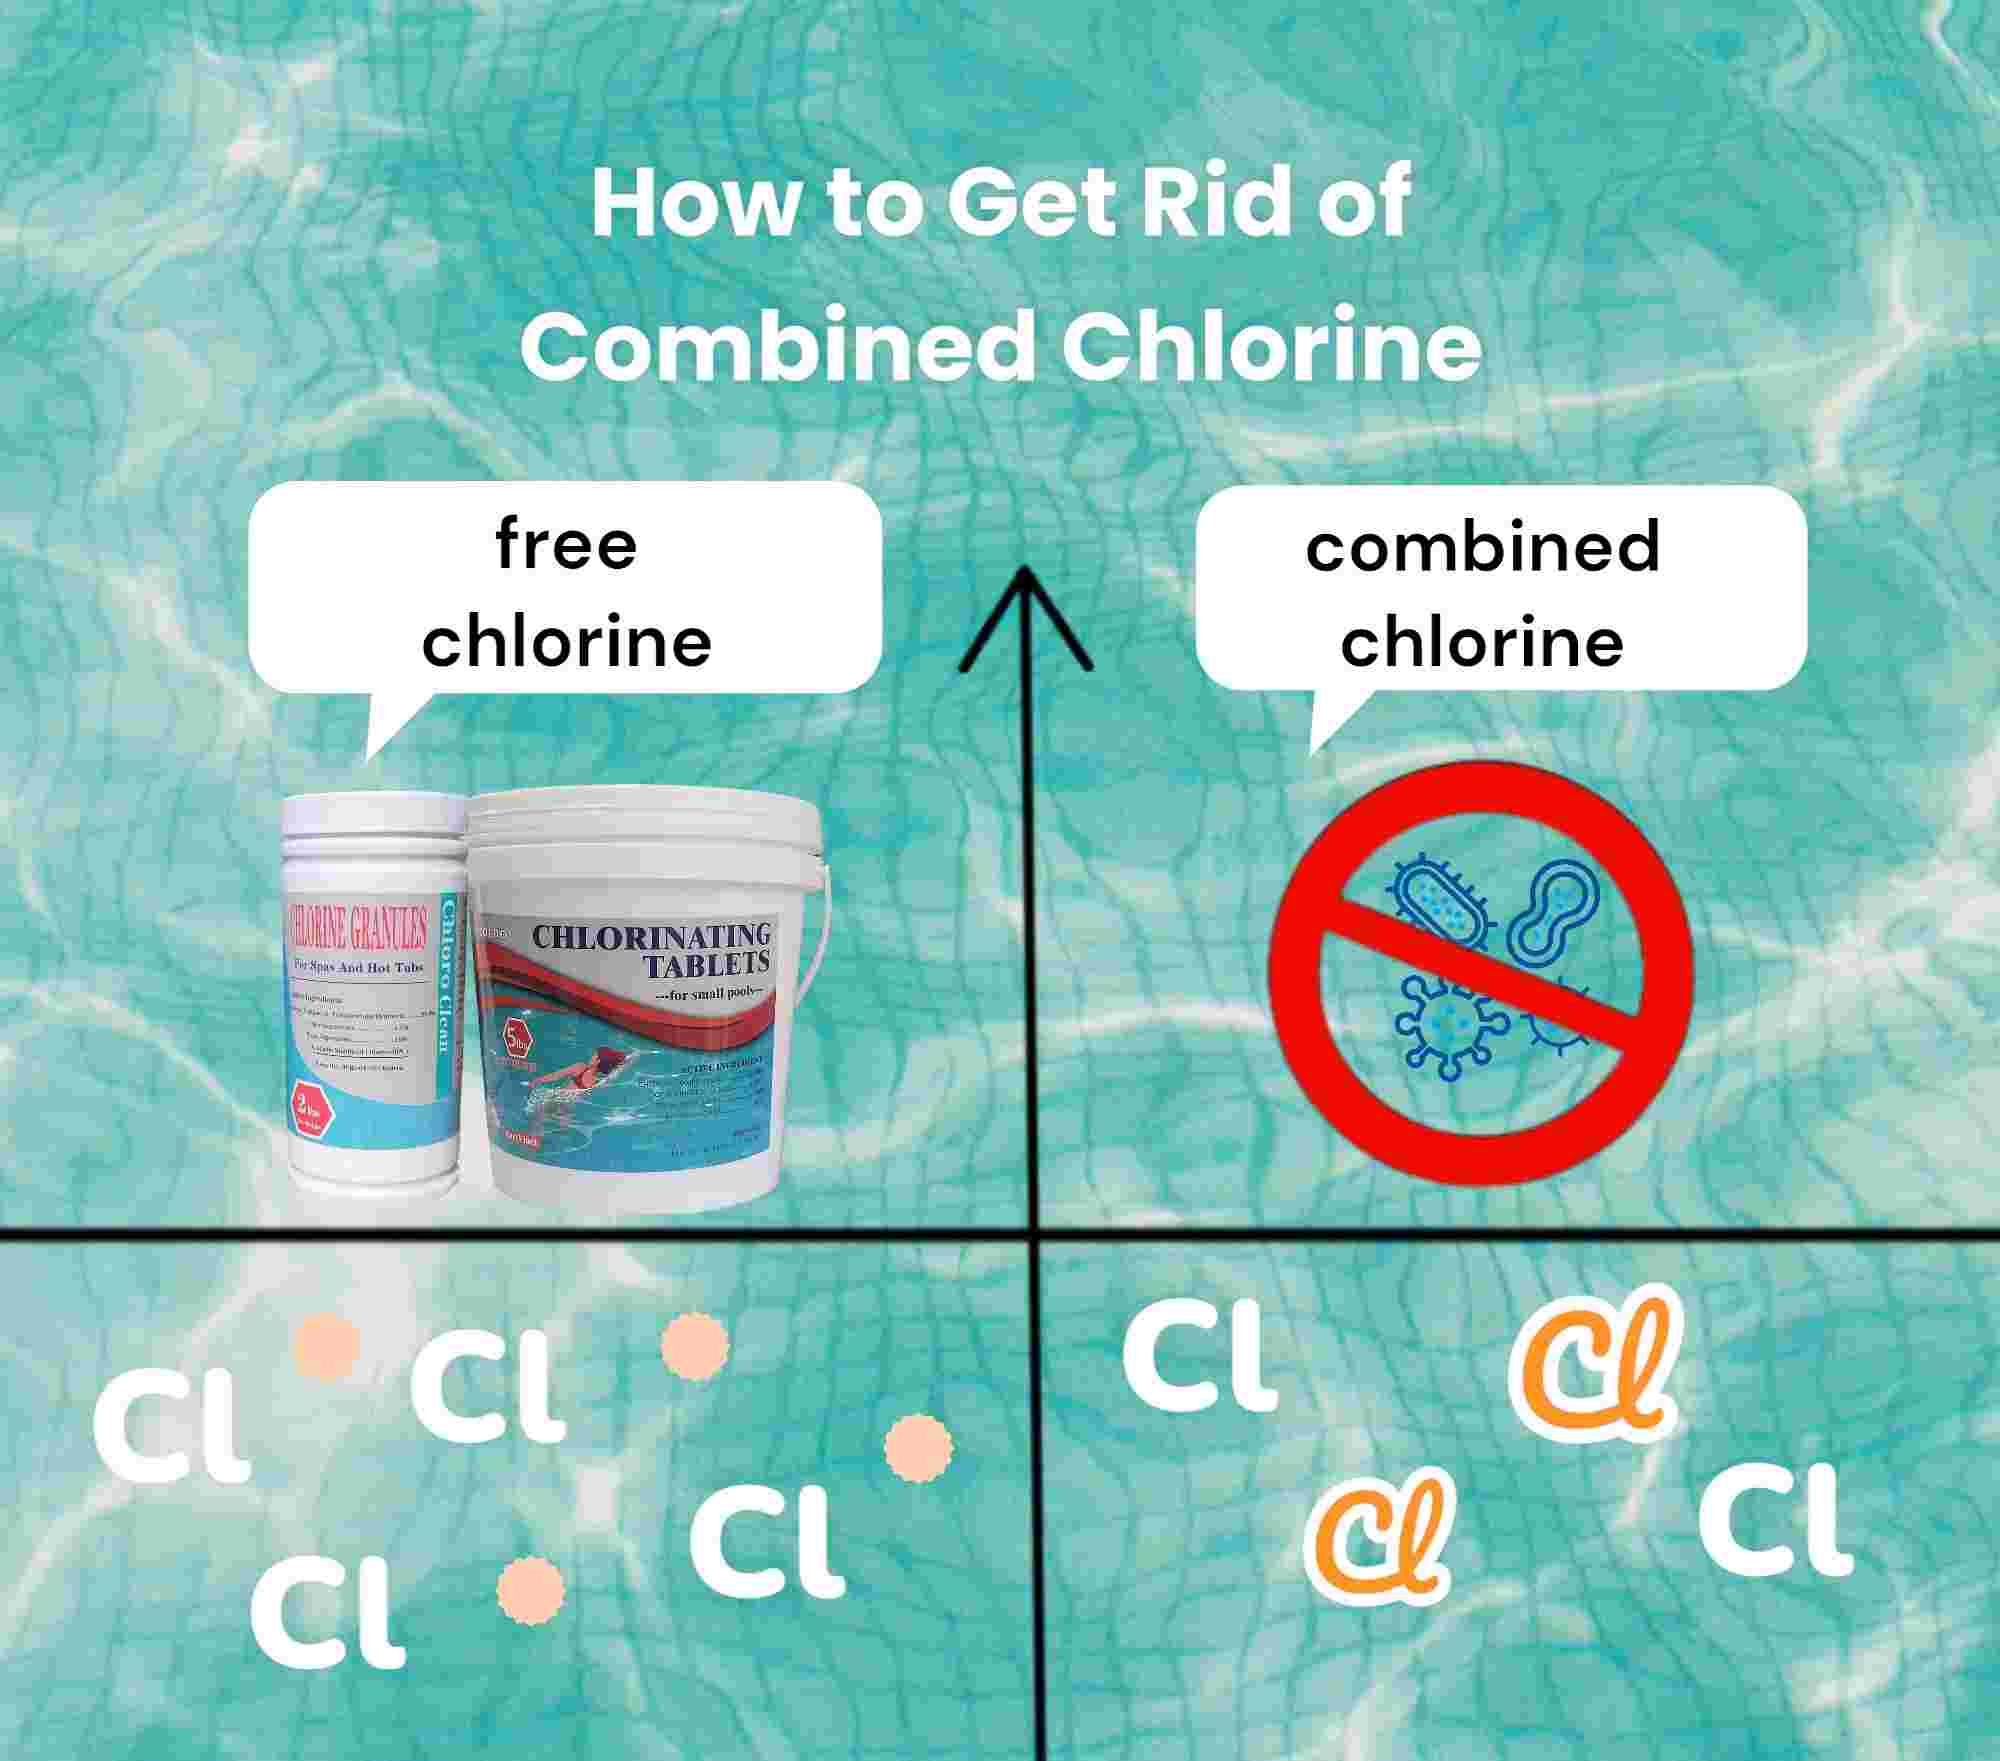 Get Rid of Combined Chlorine